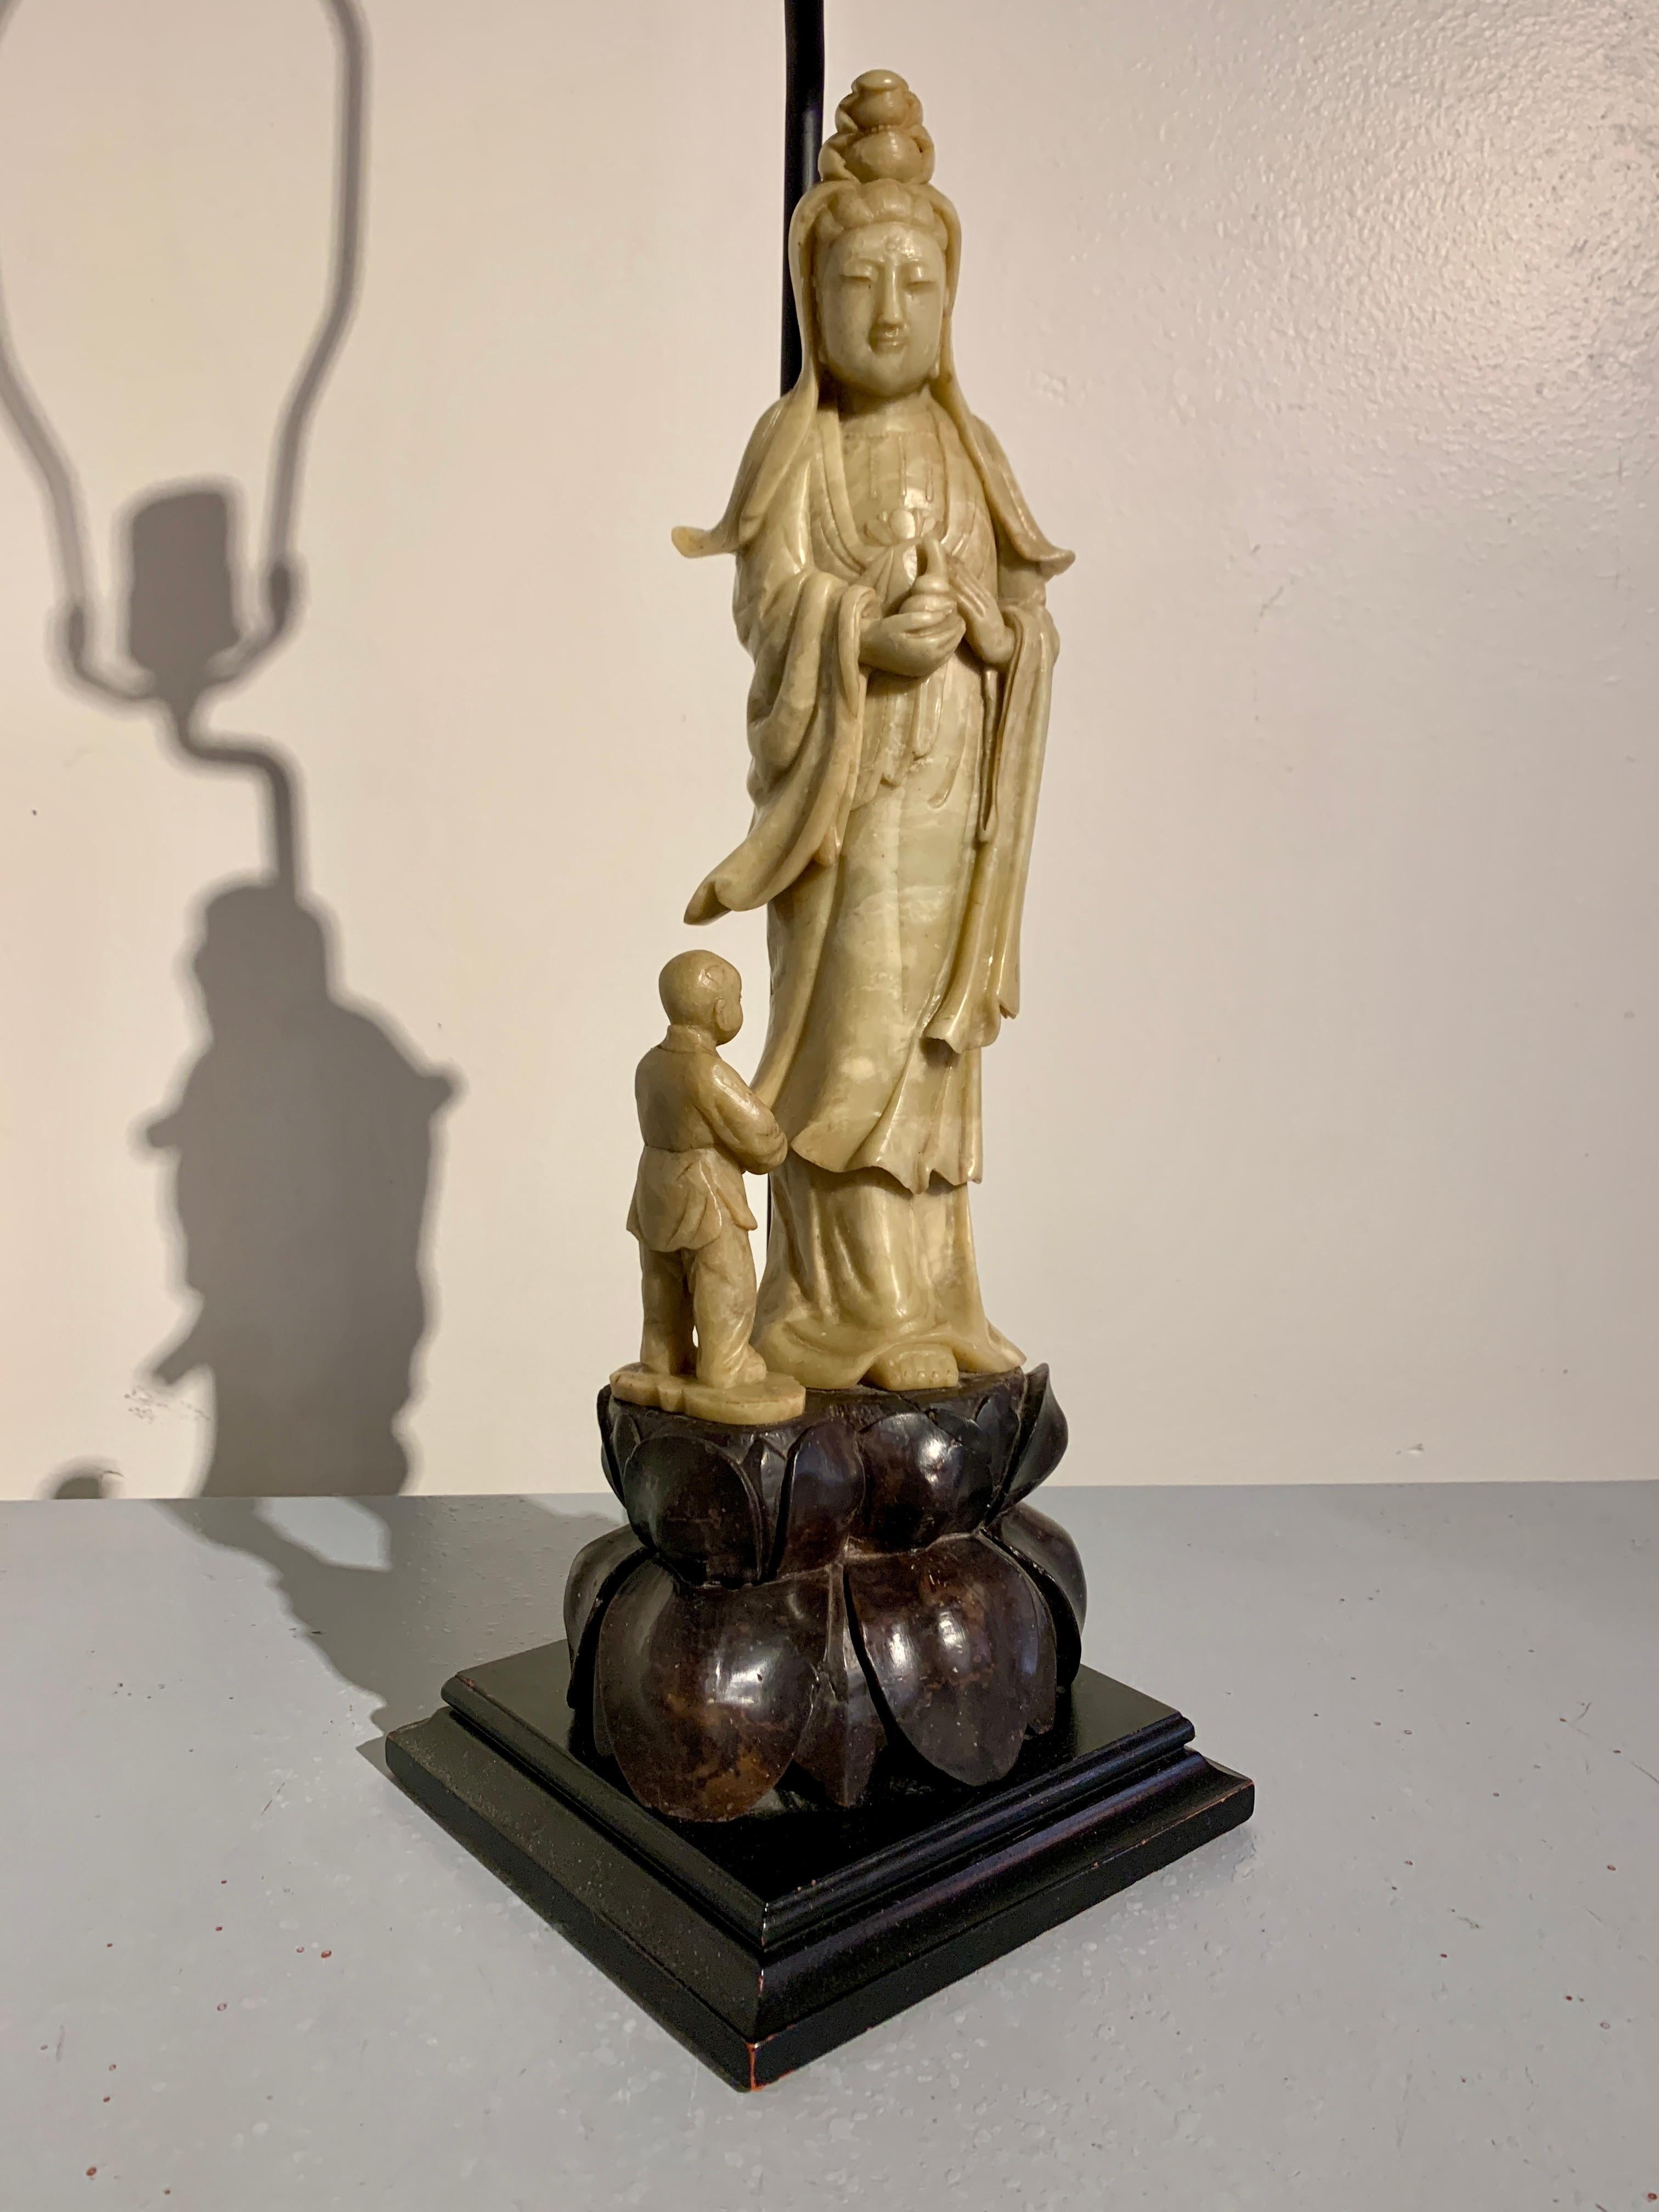 A beautiful and elegant carved soapstone figure of Guanyin and attendant, now mounted as a table lamp. The soapstone carving circa 1940's or earlier, China, mounted as a lamp in the 1960's, USA. 

Carved of a waxy soapstone, Guanyin, the bodhisattva